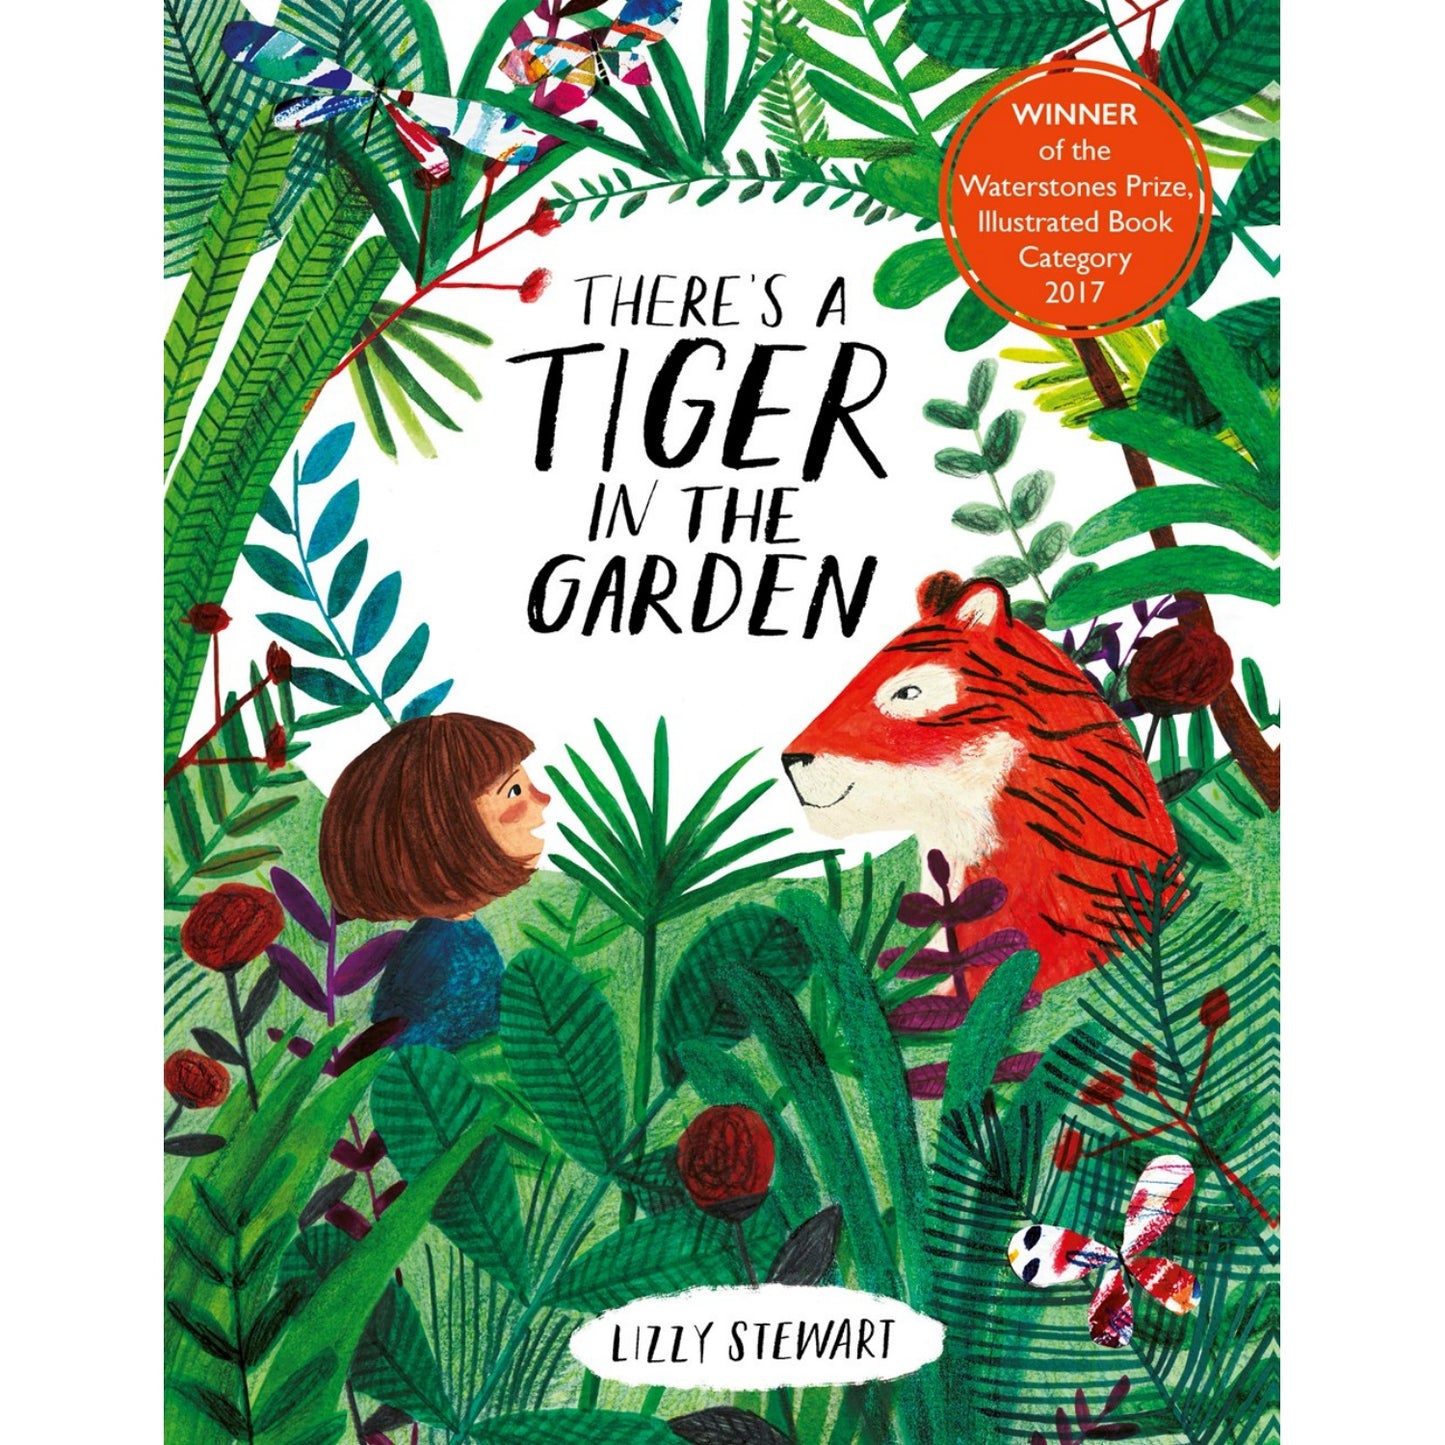 There's a Tiger in the Garden | Children's Board Book on Adventures & Imagination